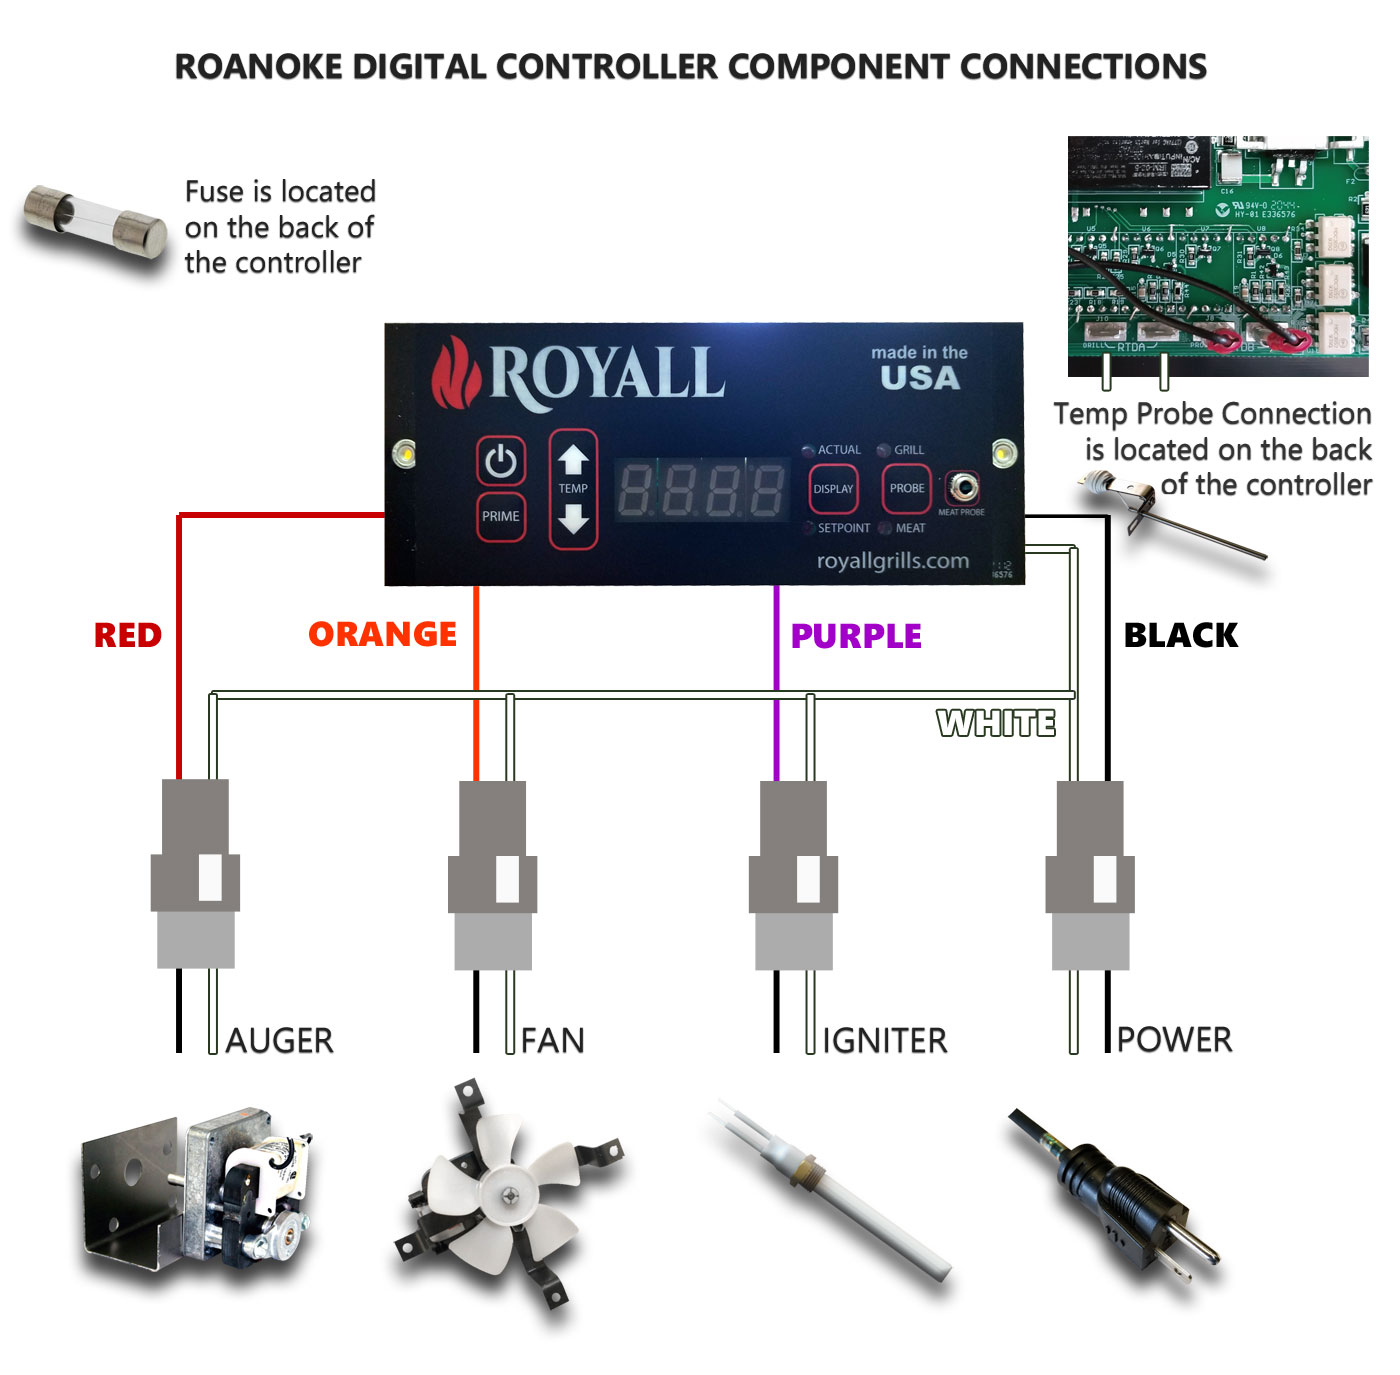 Roanoke Digital Controller Grill Connections